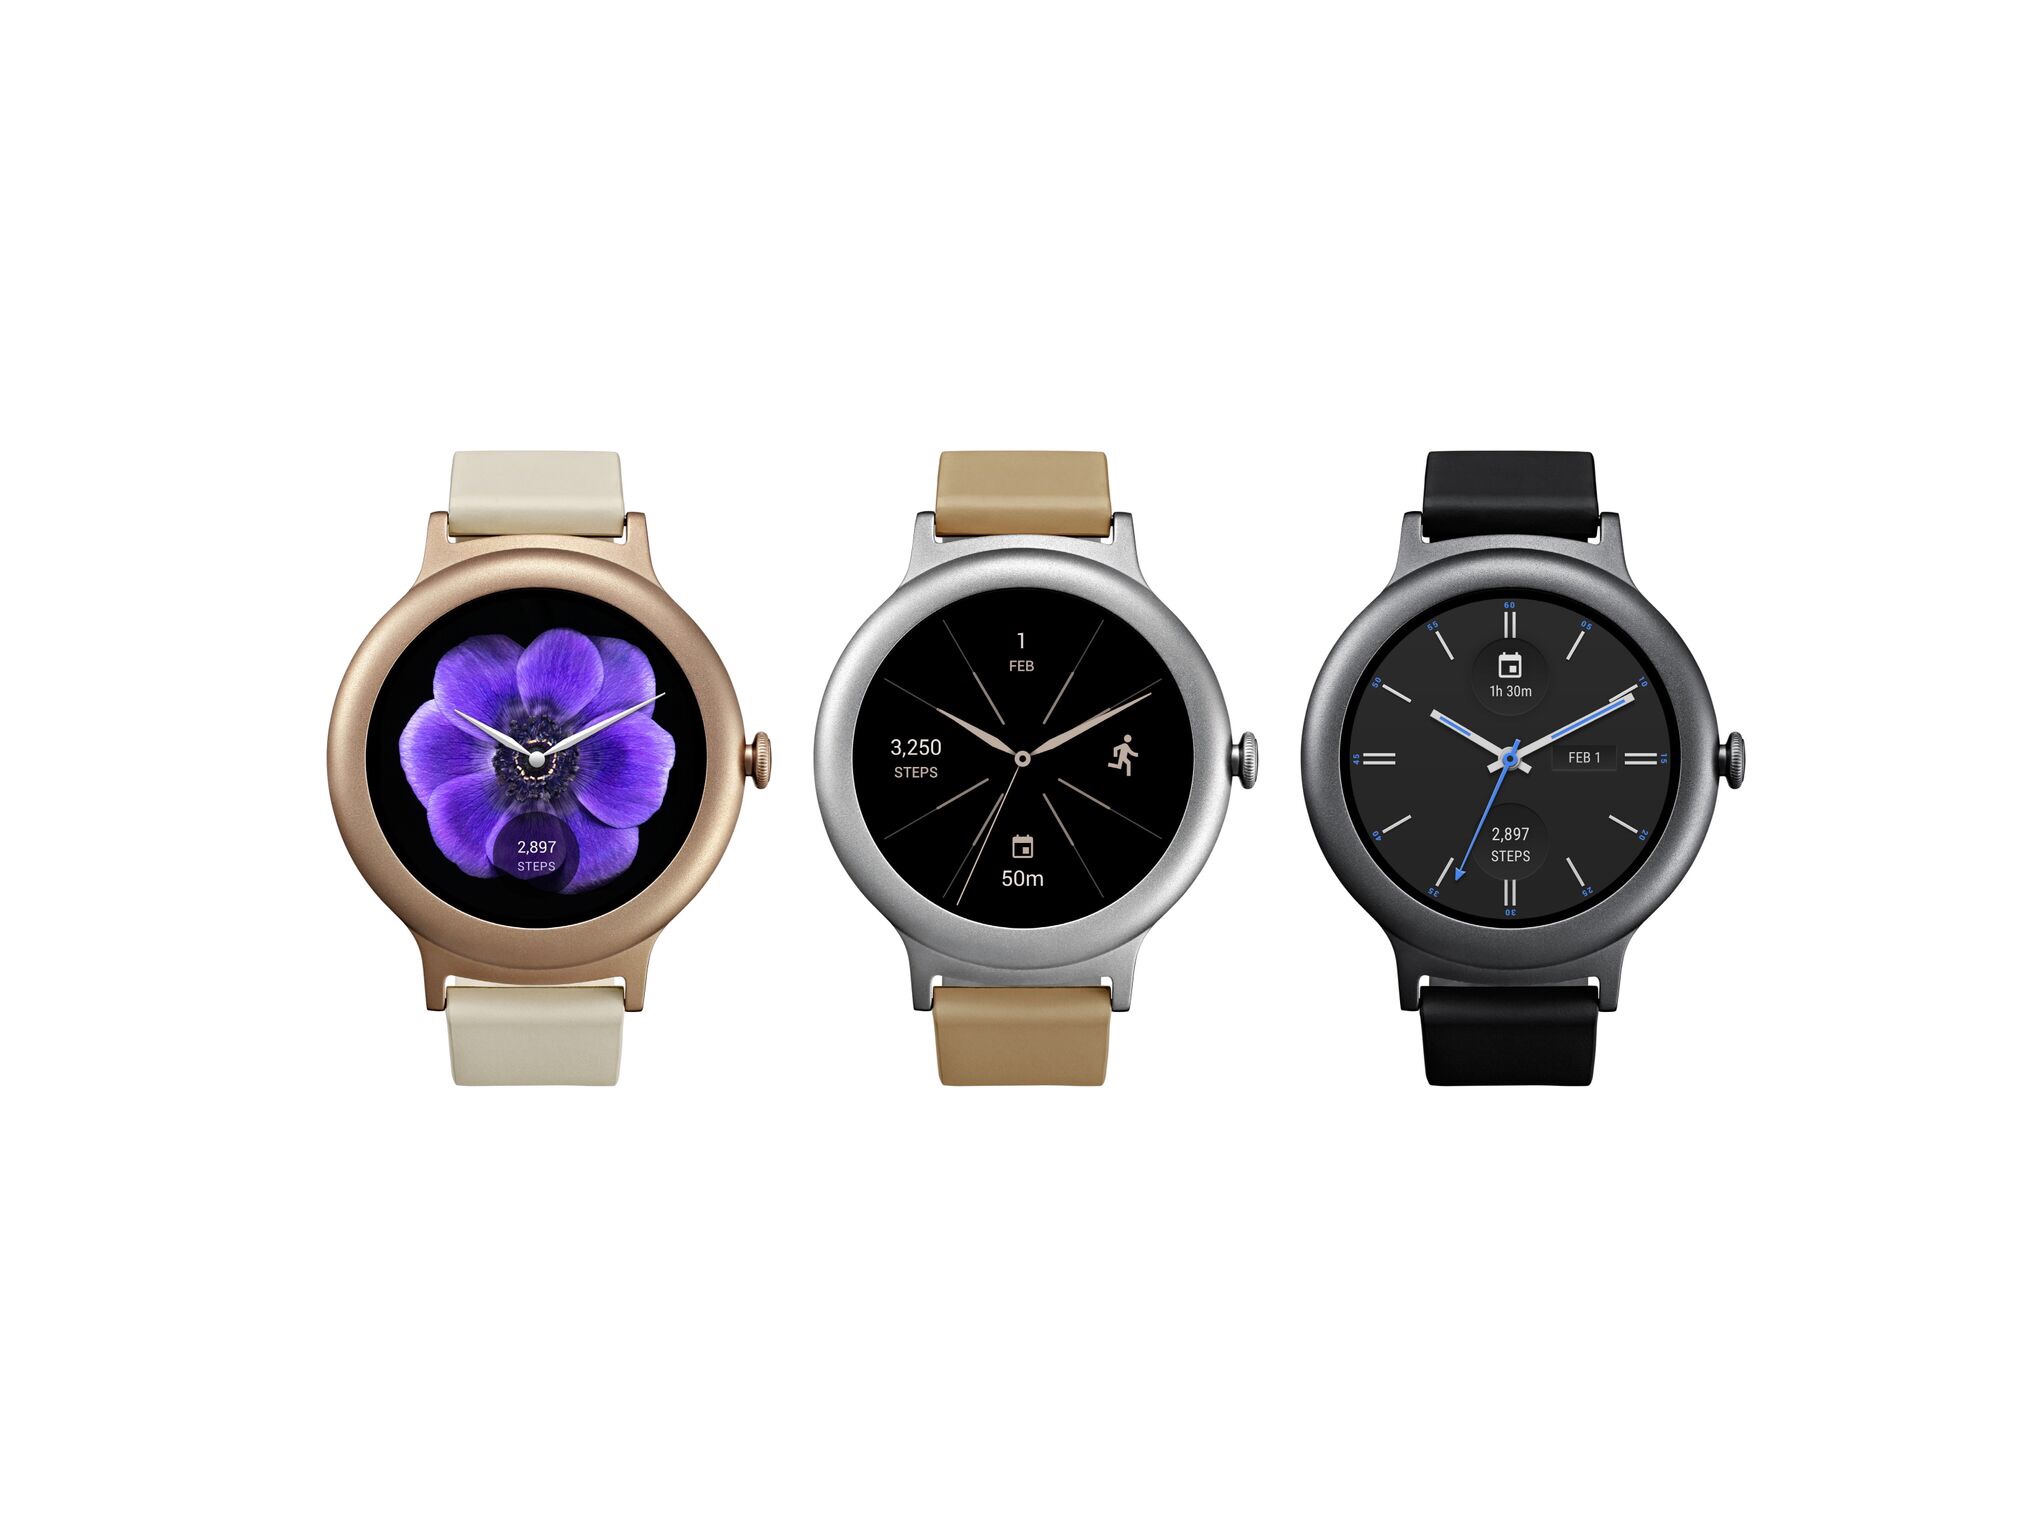 LG to launch two smartwatches with Android Wear 2.0